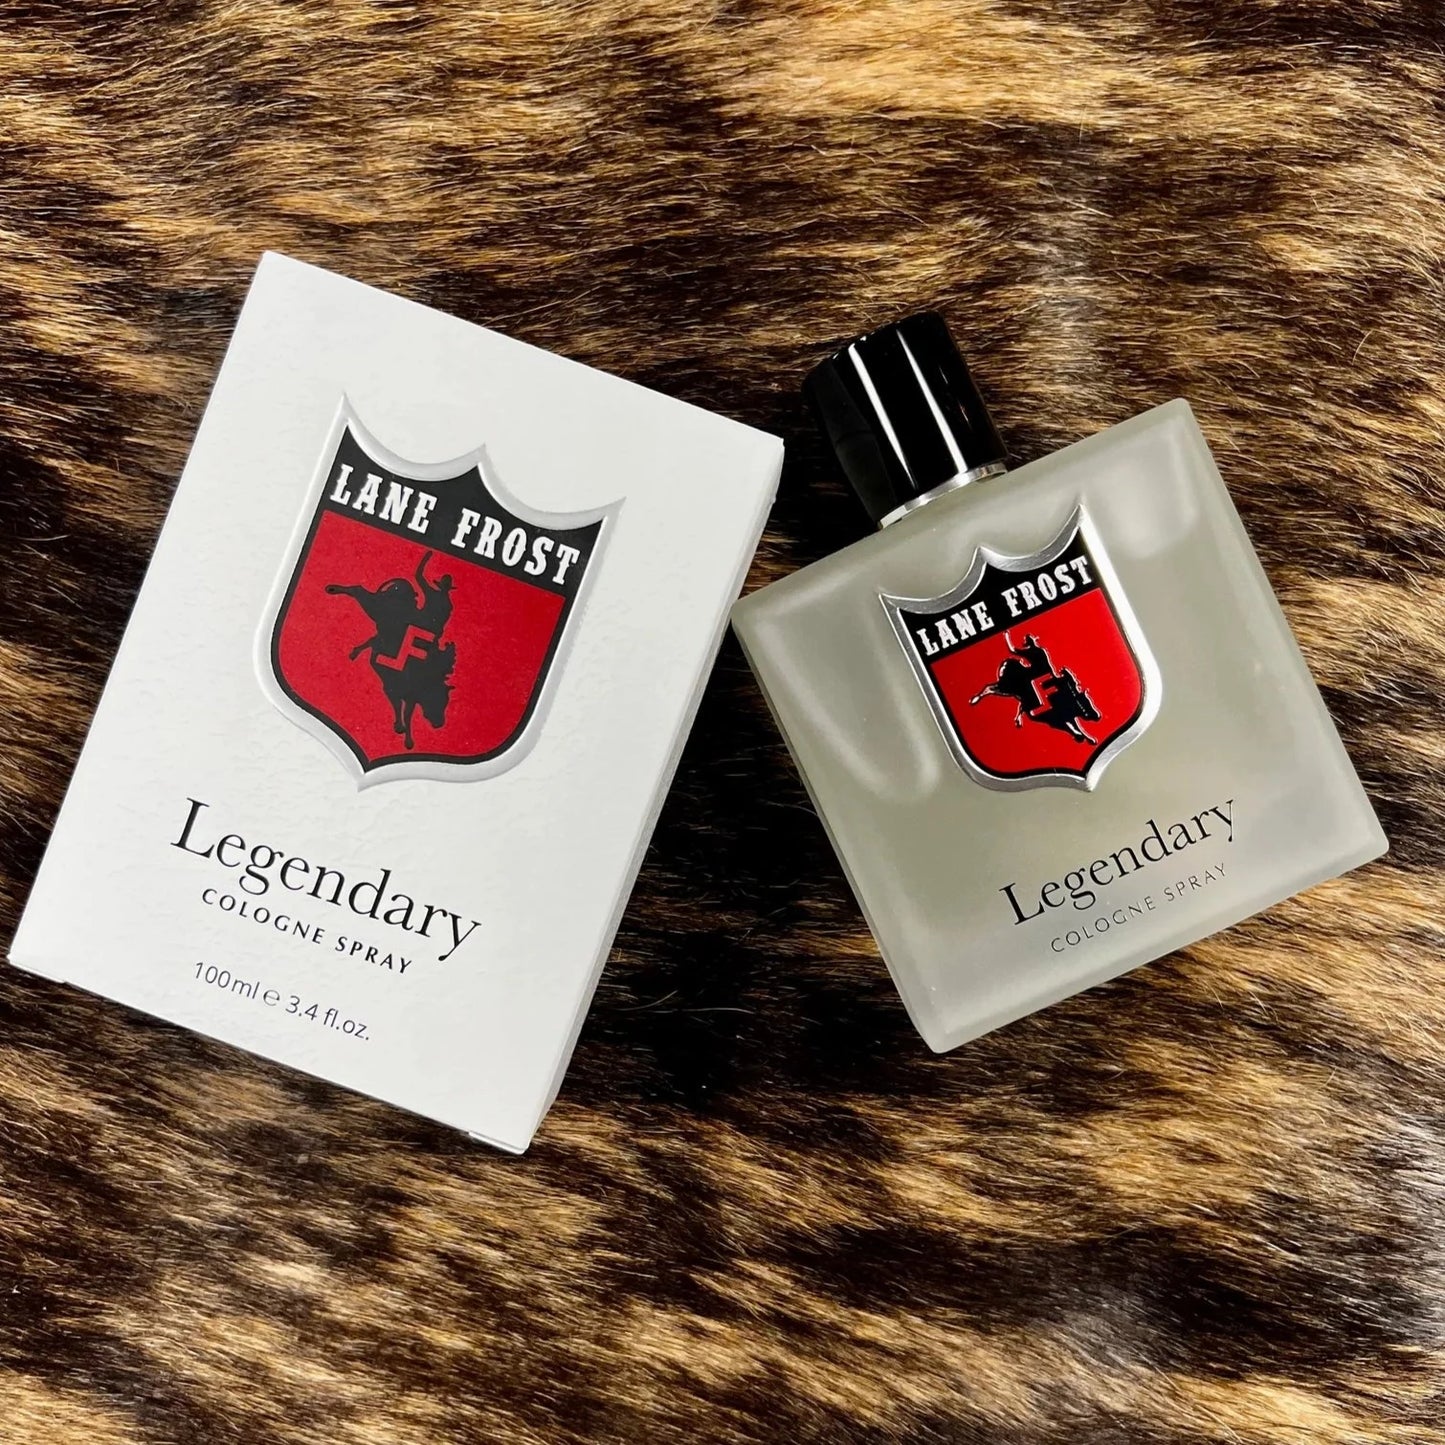 Frosted Lane Frost Legendary Cologne